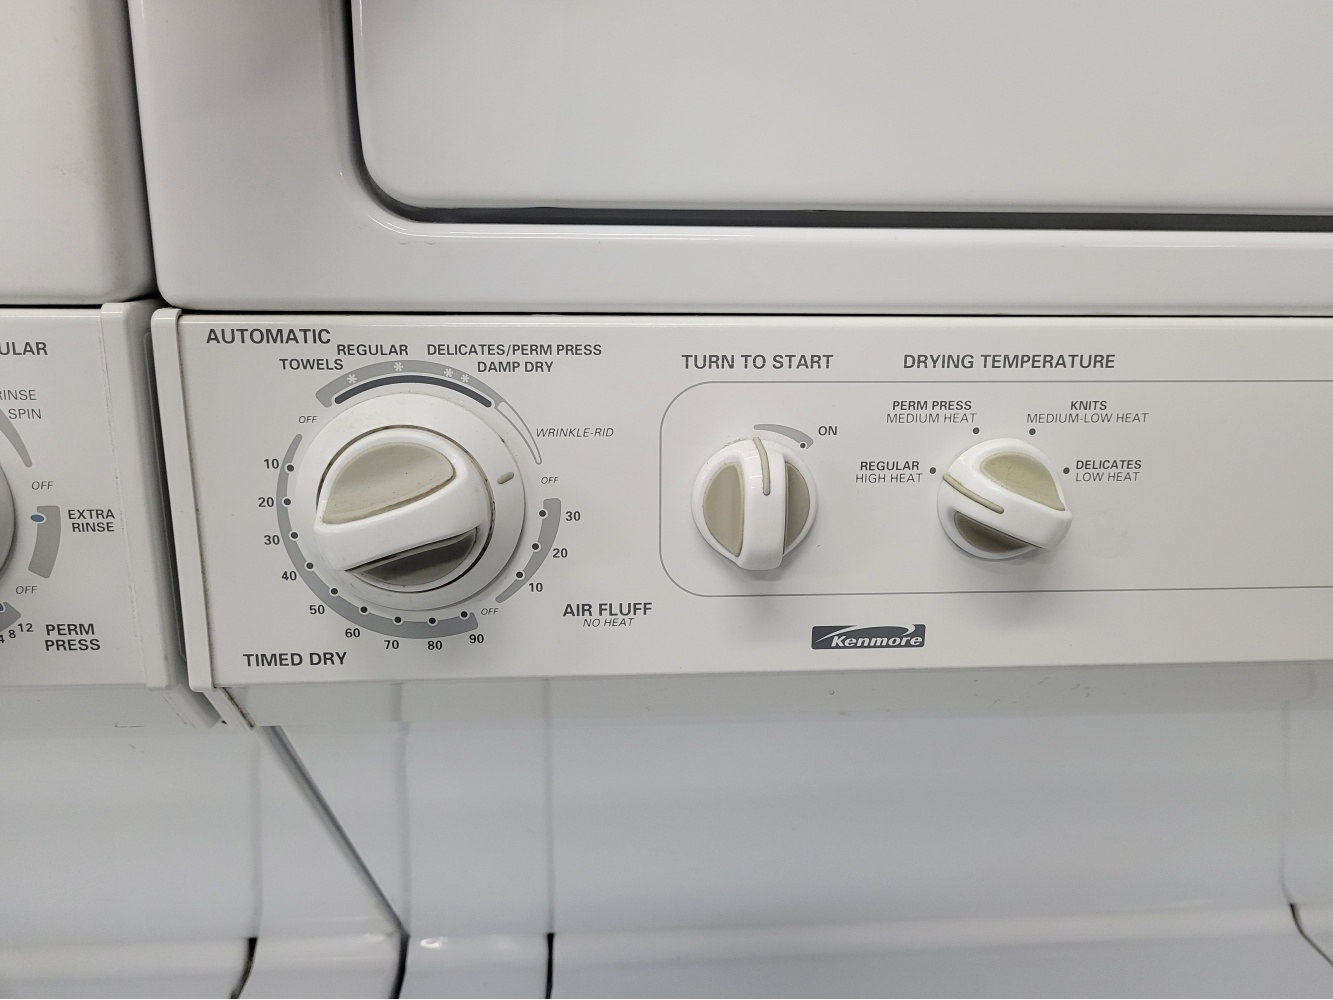 KENMORE 27'' TOP LOADING GAS LAUNDRY ***OUT OF STOCK*** - Kimo's Appliances  Van Nuys